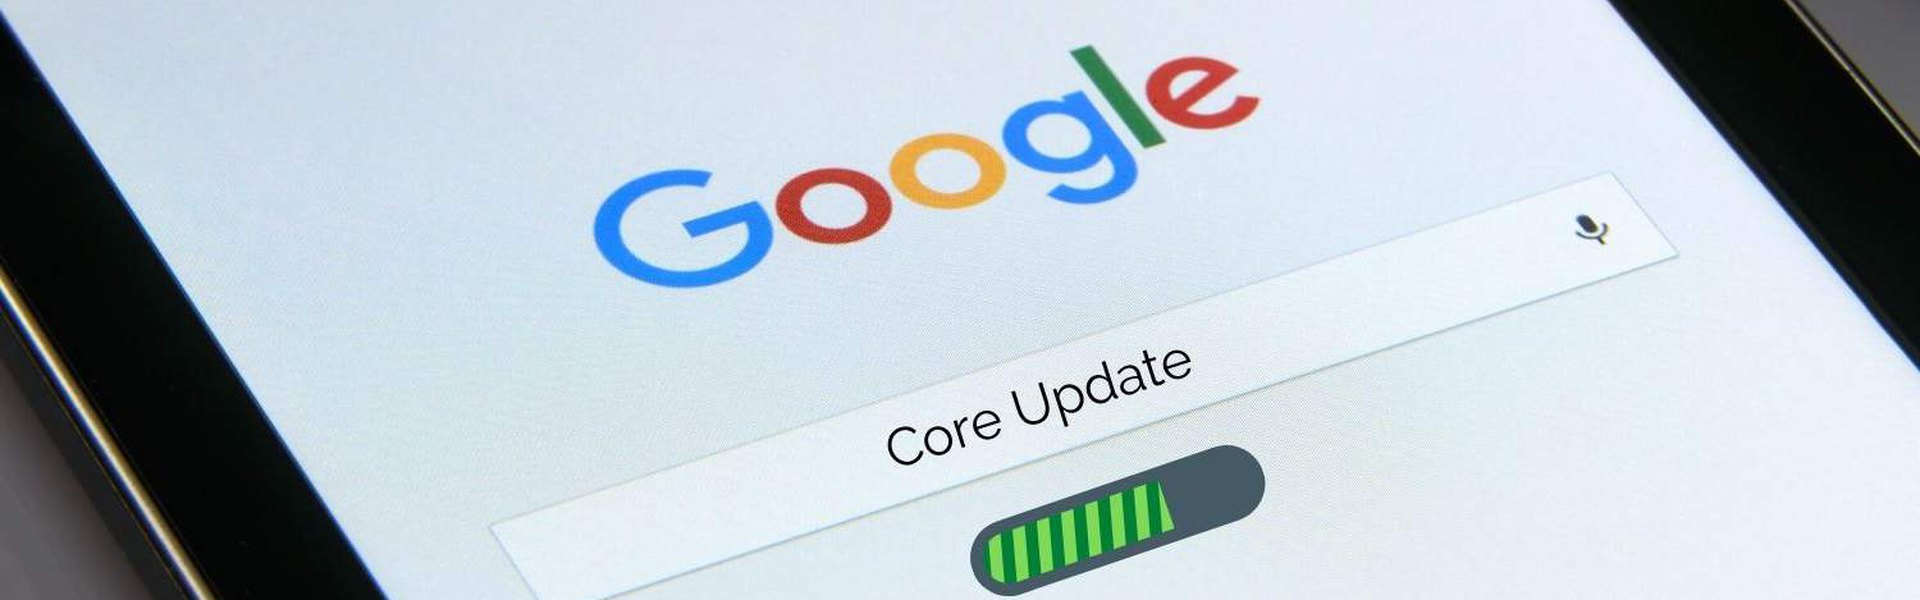 The 2020 Google Core Update: Why Do All SEOs Care?